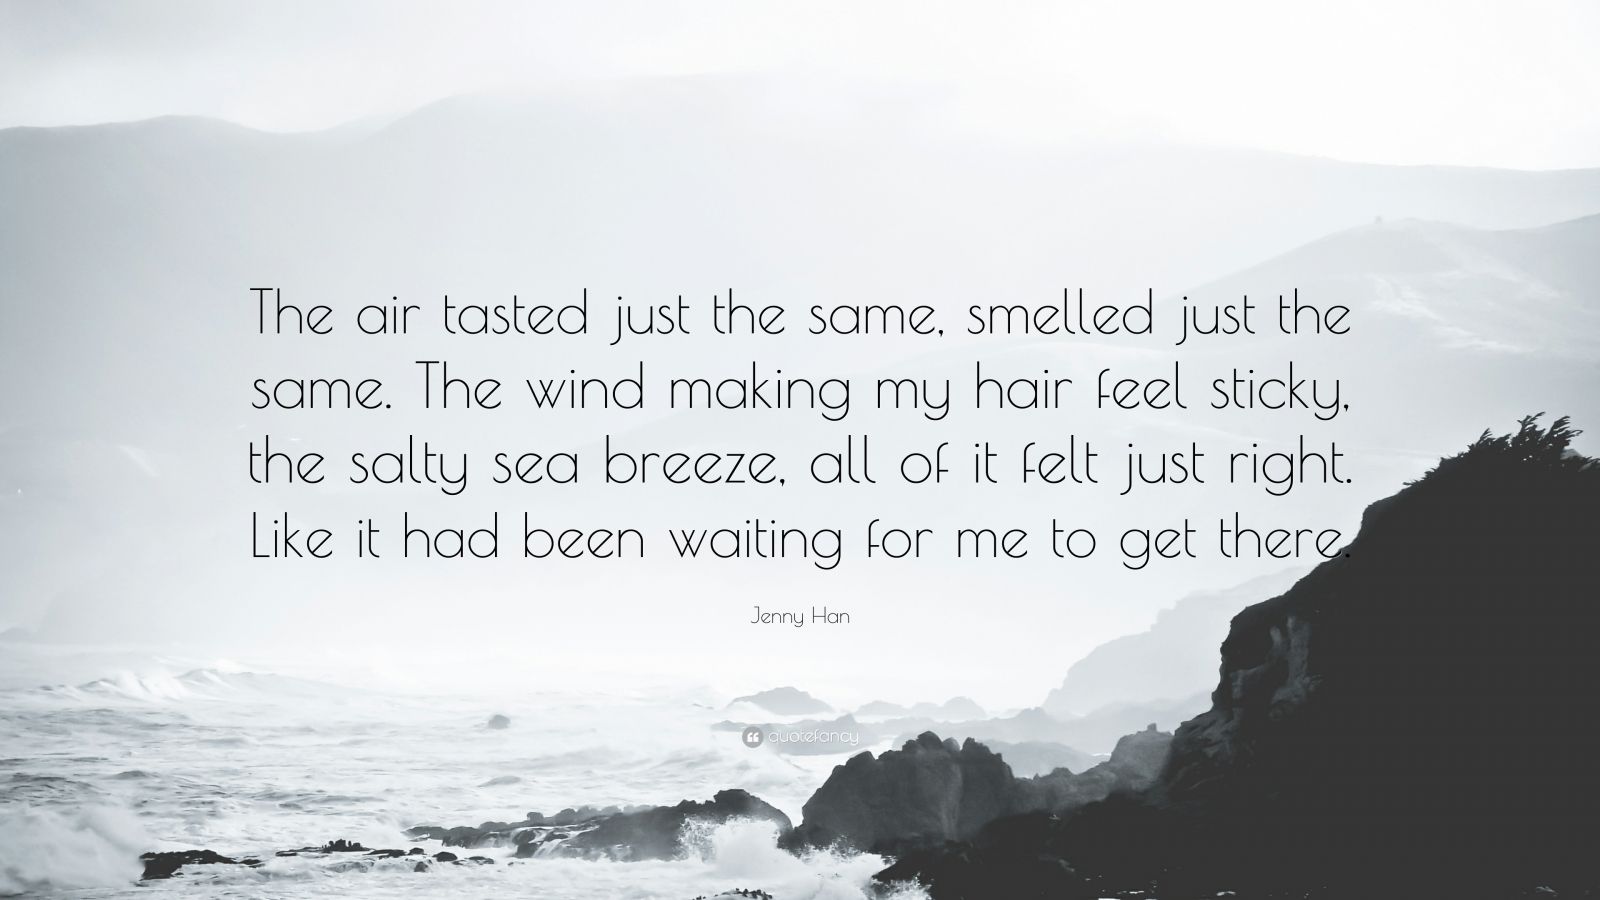 Jenny Han Quote: “The air tasted just the same, smelled just the same. The  wind making my hair feel sticky, the salty sea breeze, all of i...”